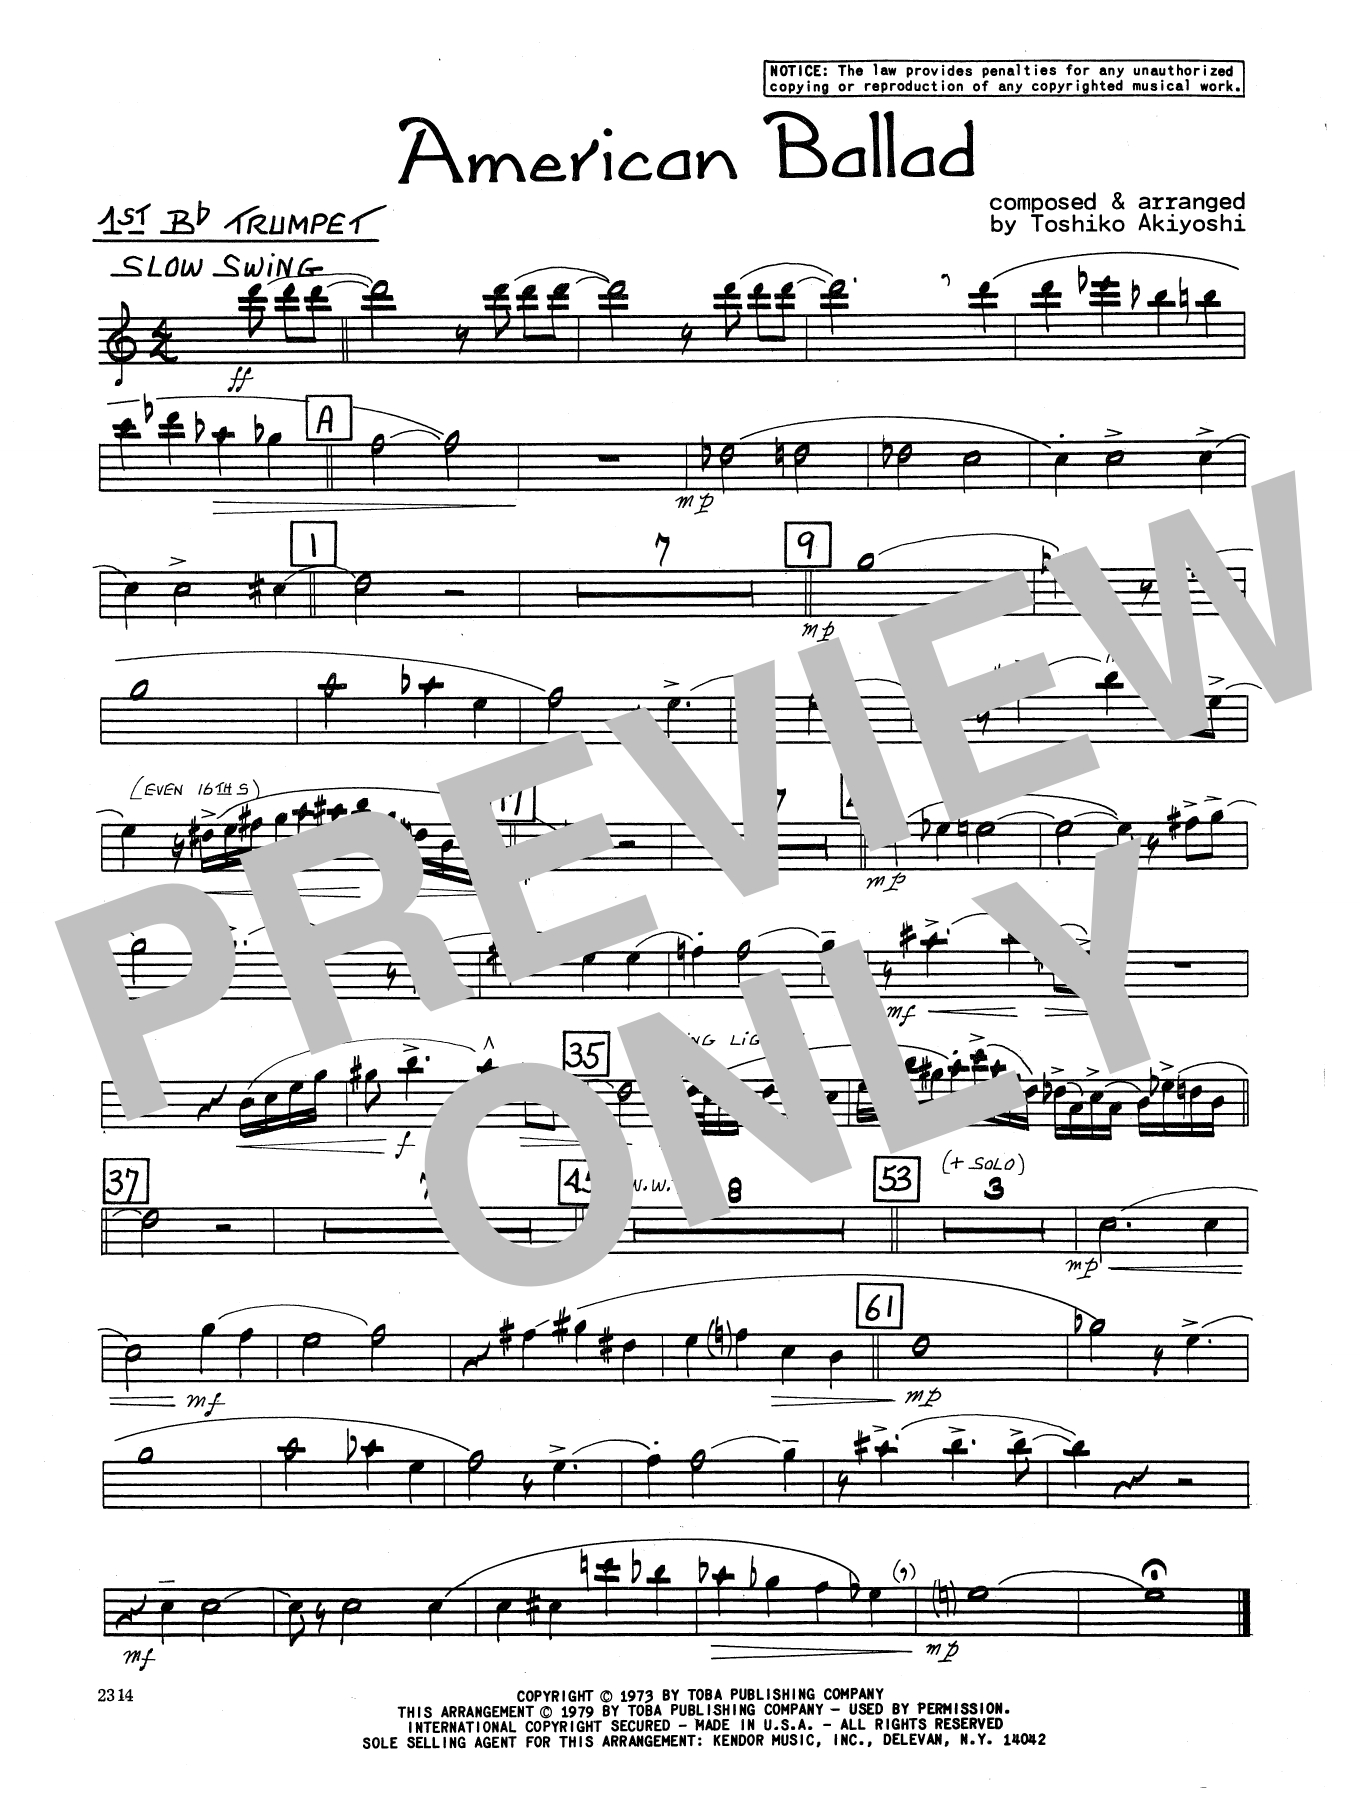 Toshiko Akiyoshi American Ballad - 1st Bb Trumpet sheet music preview music notes and score for Jazz Ensemble including 1 page(s)